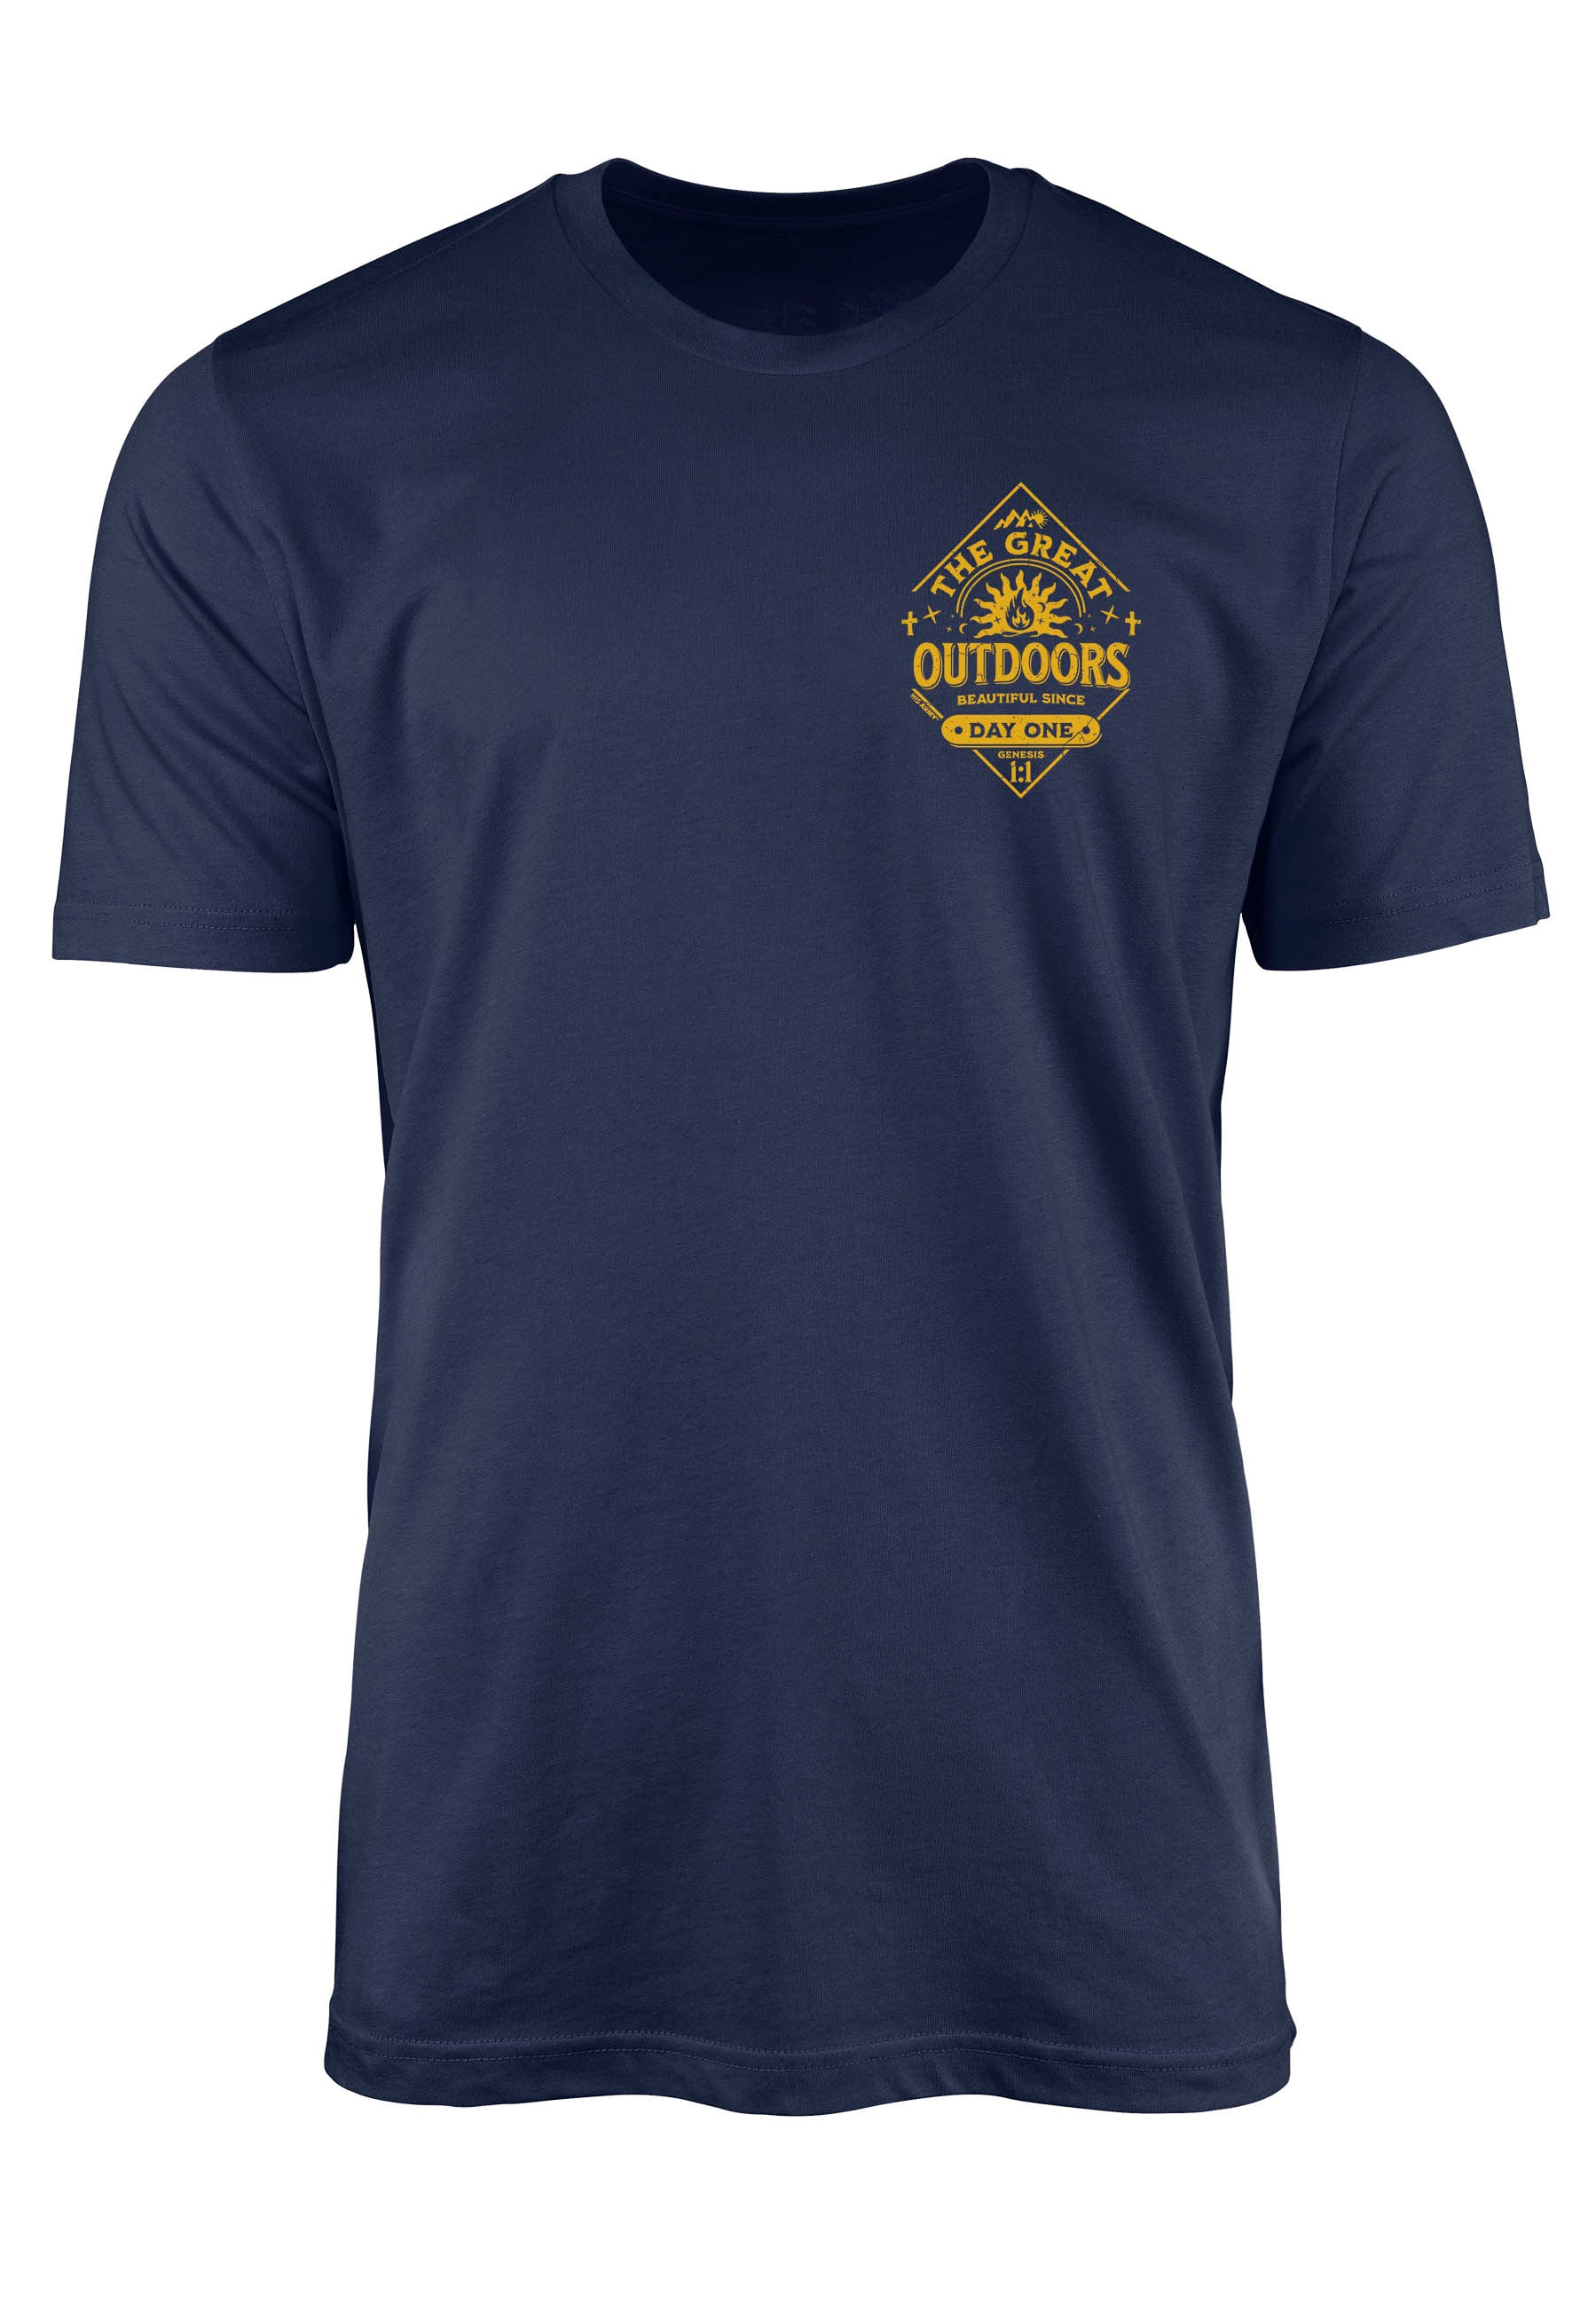 Christian t-shirt for outdoorsy type